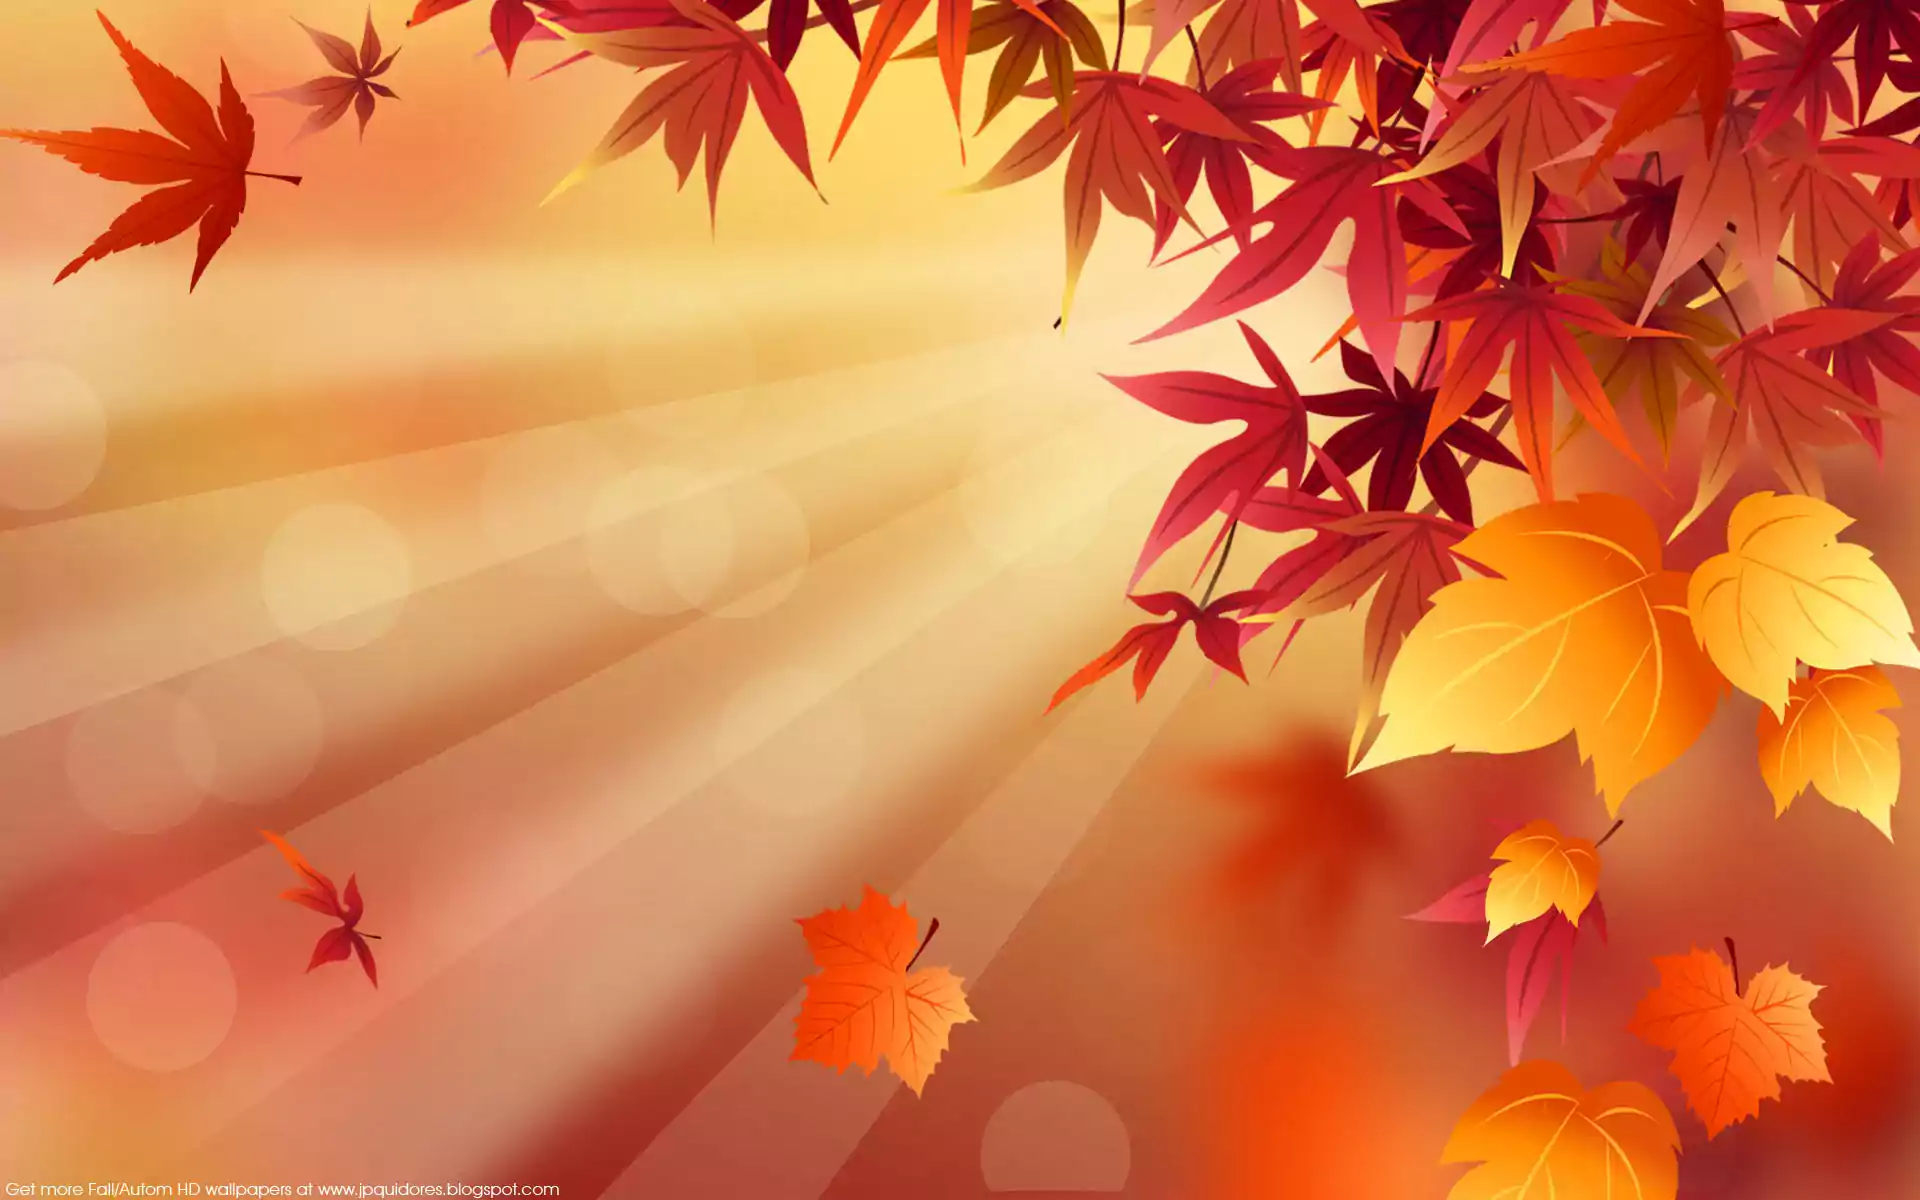 Fall Background Wallpaper - NawPic